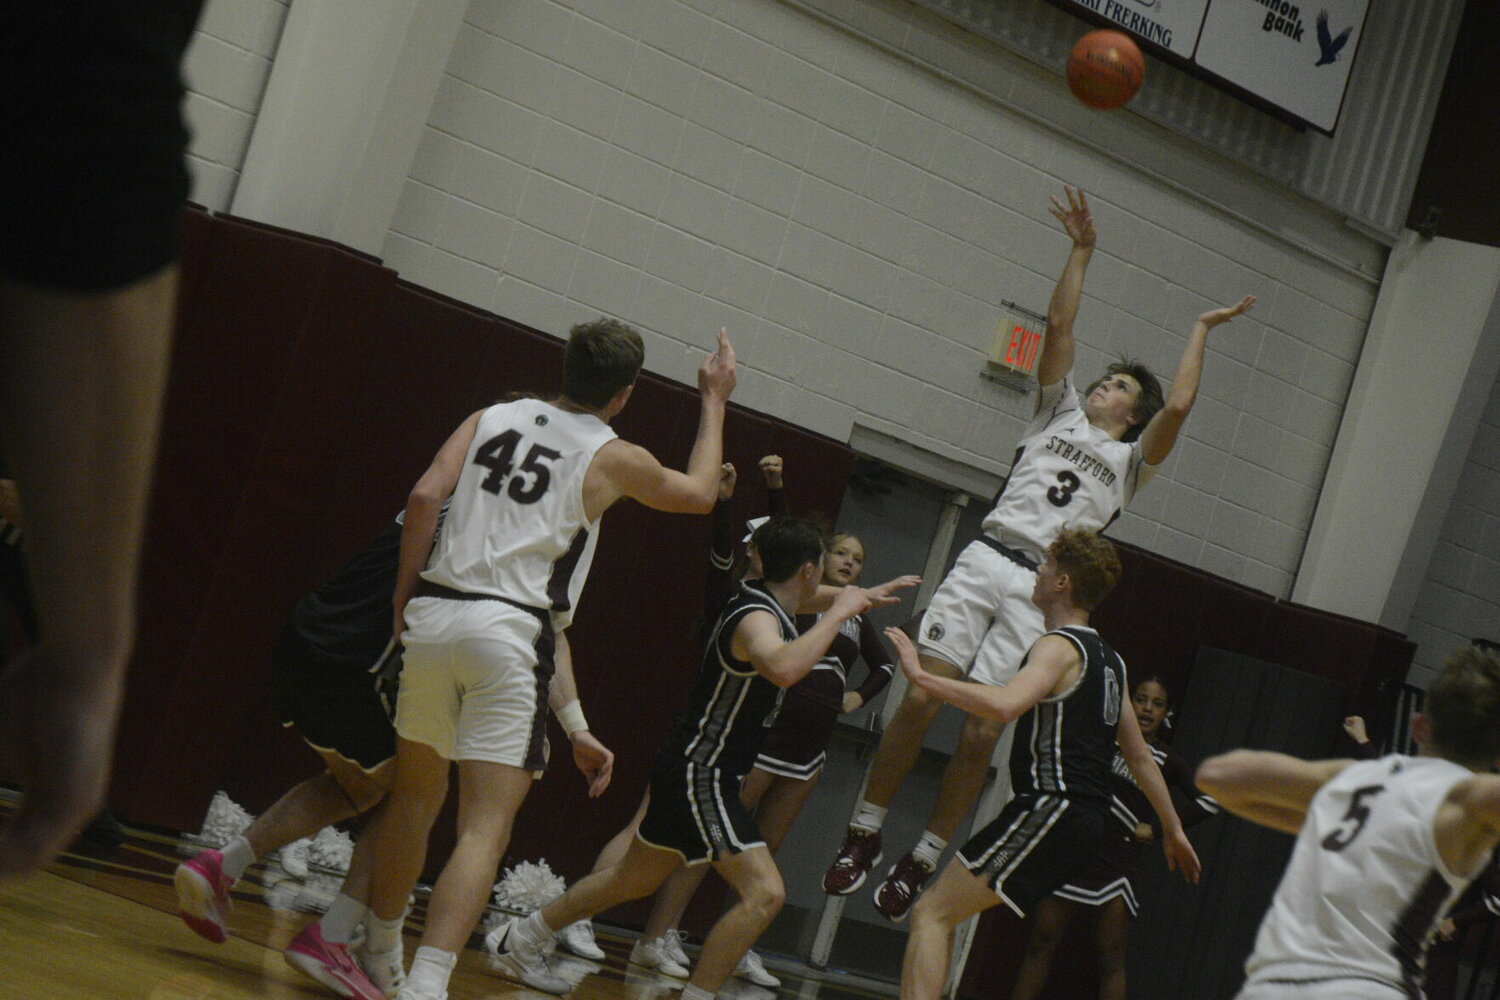 Cody Voysey, senior, pulls up on the baseline against Sparta on Saturday, Dec. 2 at the Strafford Invitational's championship game. The Indians took second place. 


Mail photo by Ryder Berger